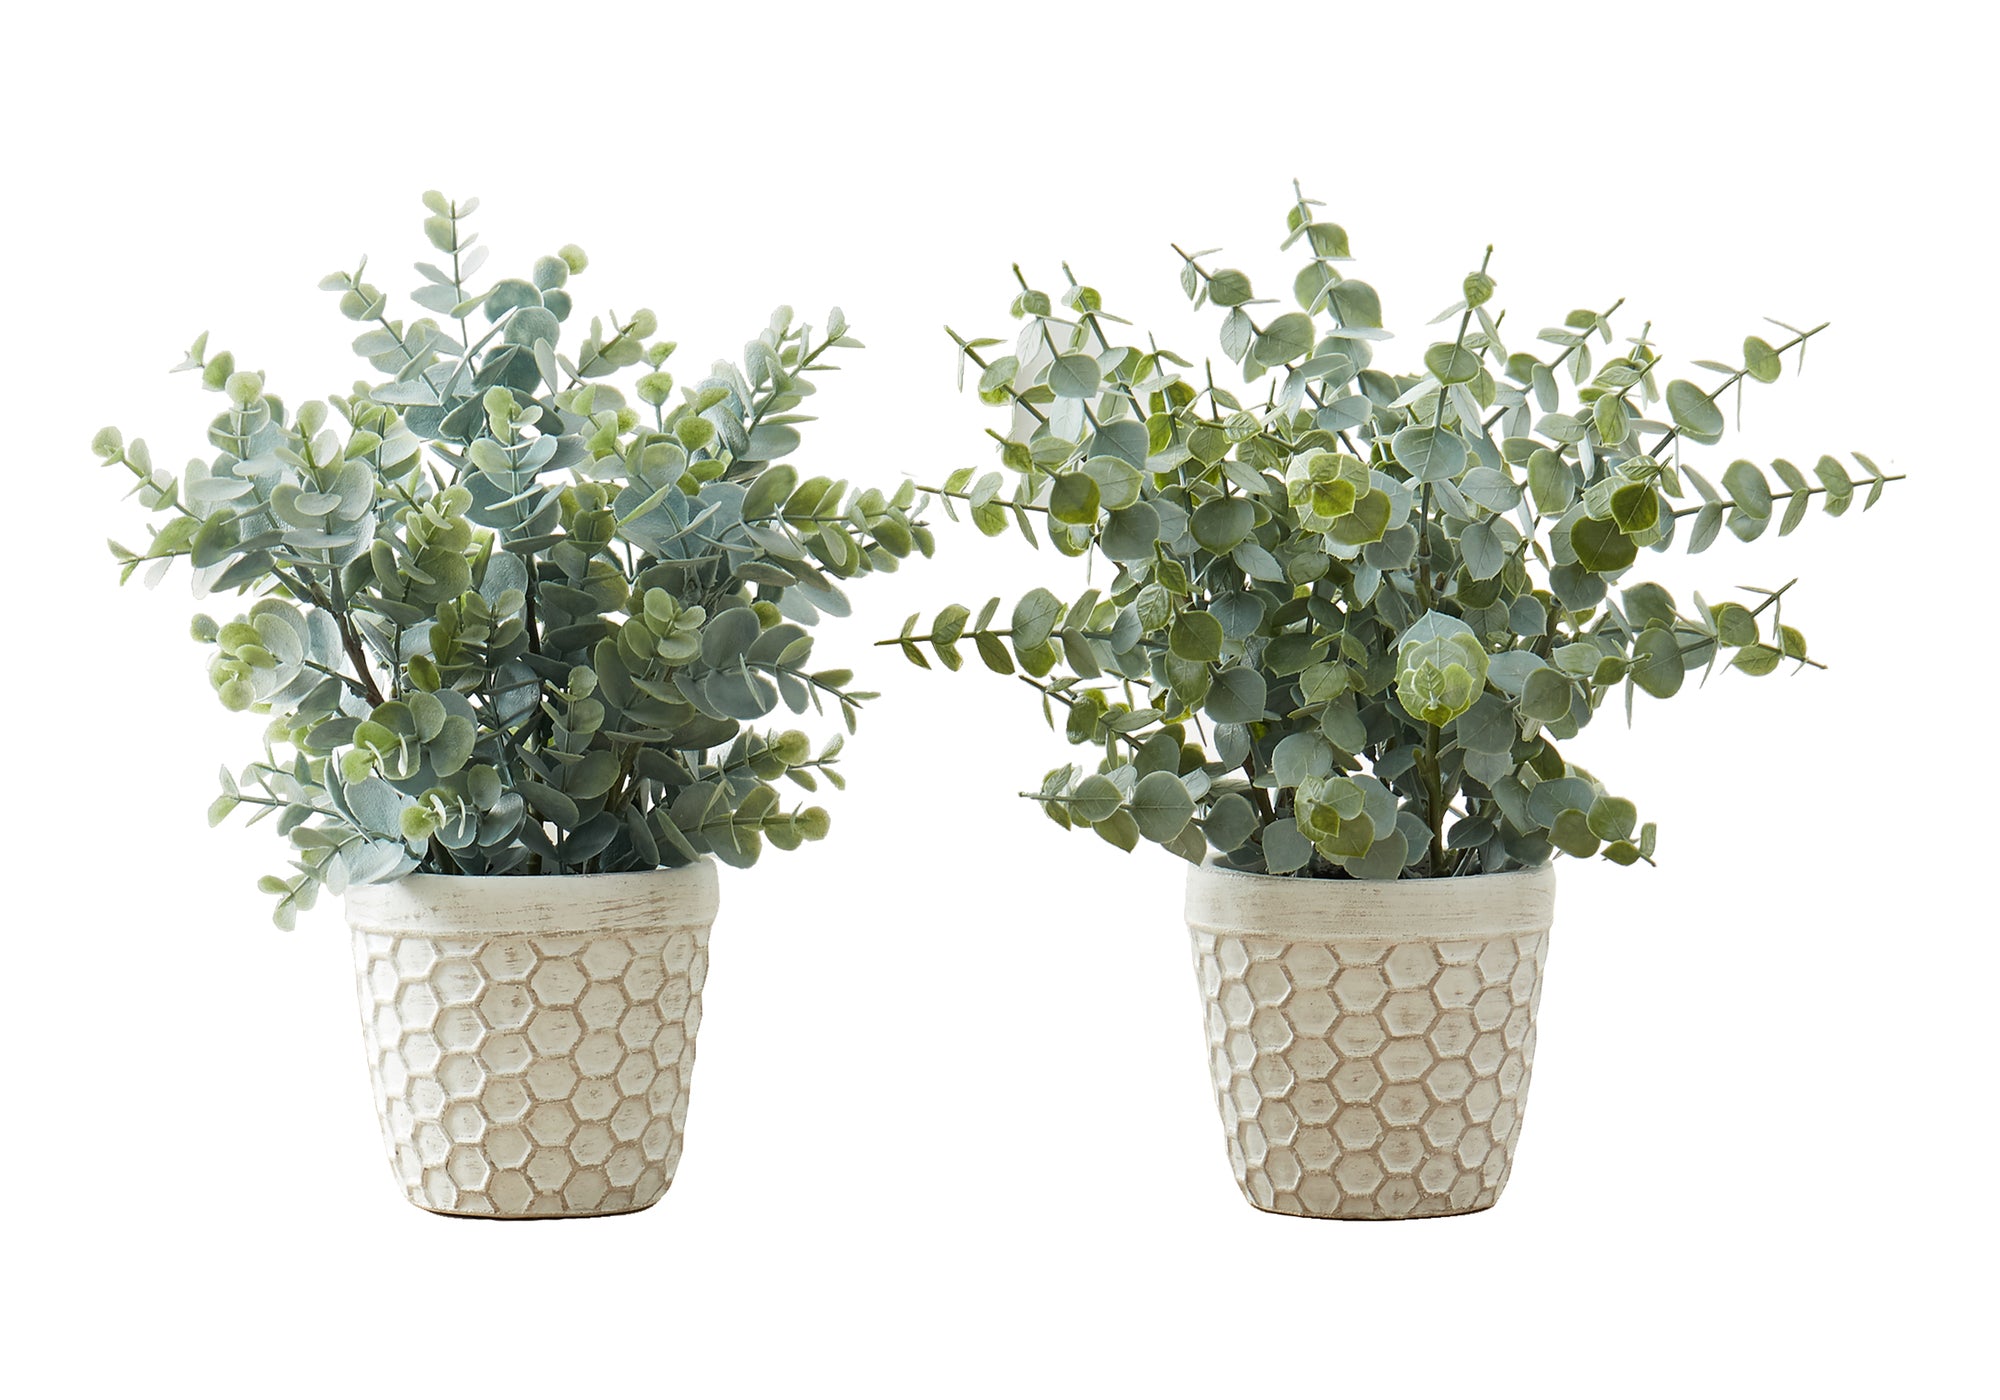 MN-719581    Artificial Plant, 13" Tall, Eucalyptus Grass, Indoor, Faux, Fake, Table, Greenery, Potted, Set Of 2, Decorative, Green Leaves, White Pots